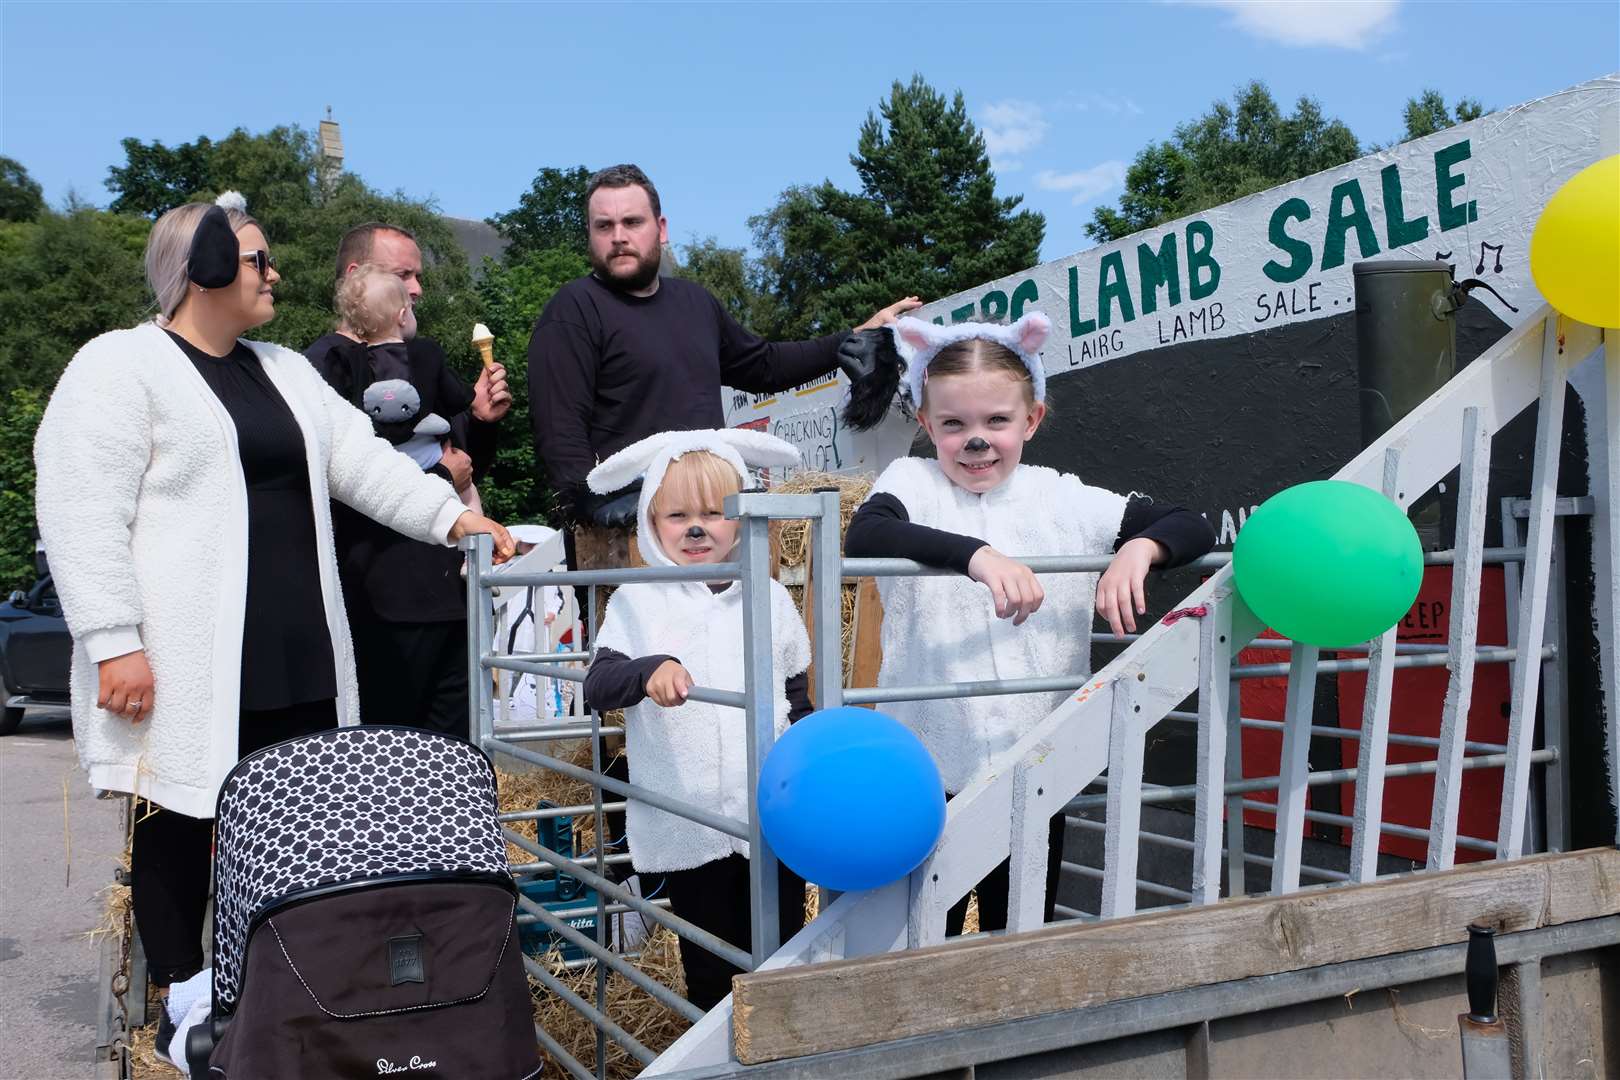 It wouldn't be Lairg Gala without a reference to a lamb sale. Don't these little ones looks sweet.